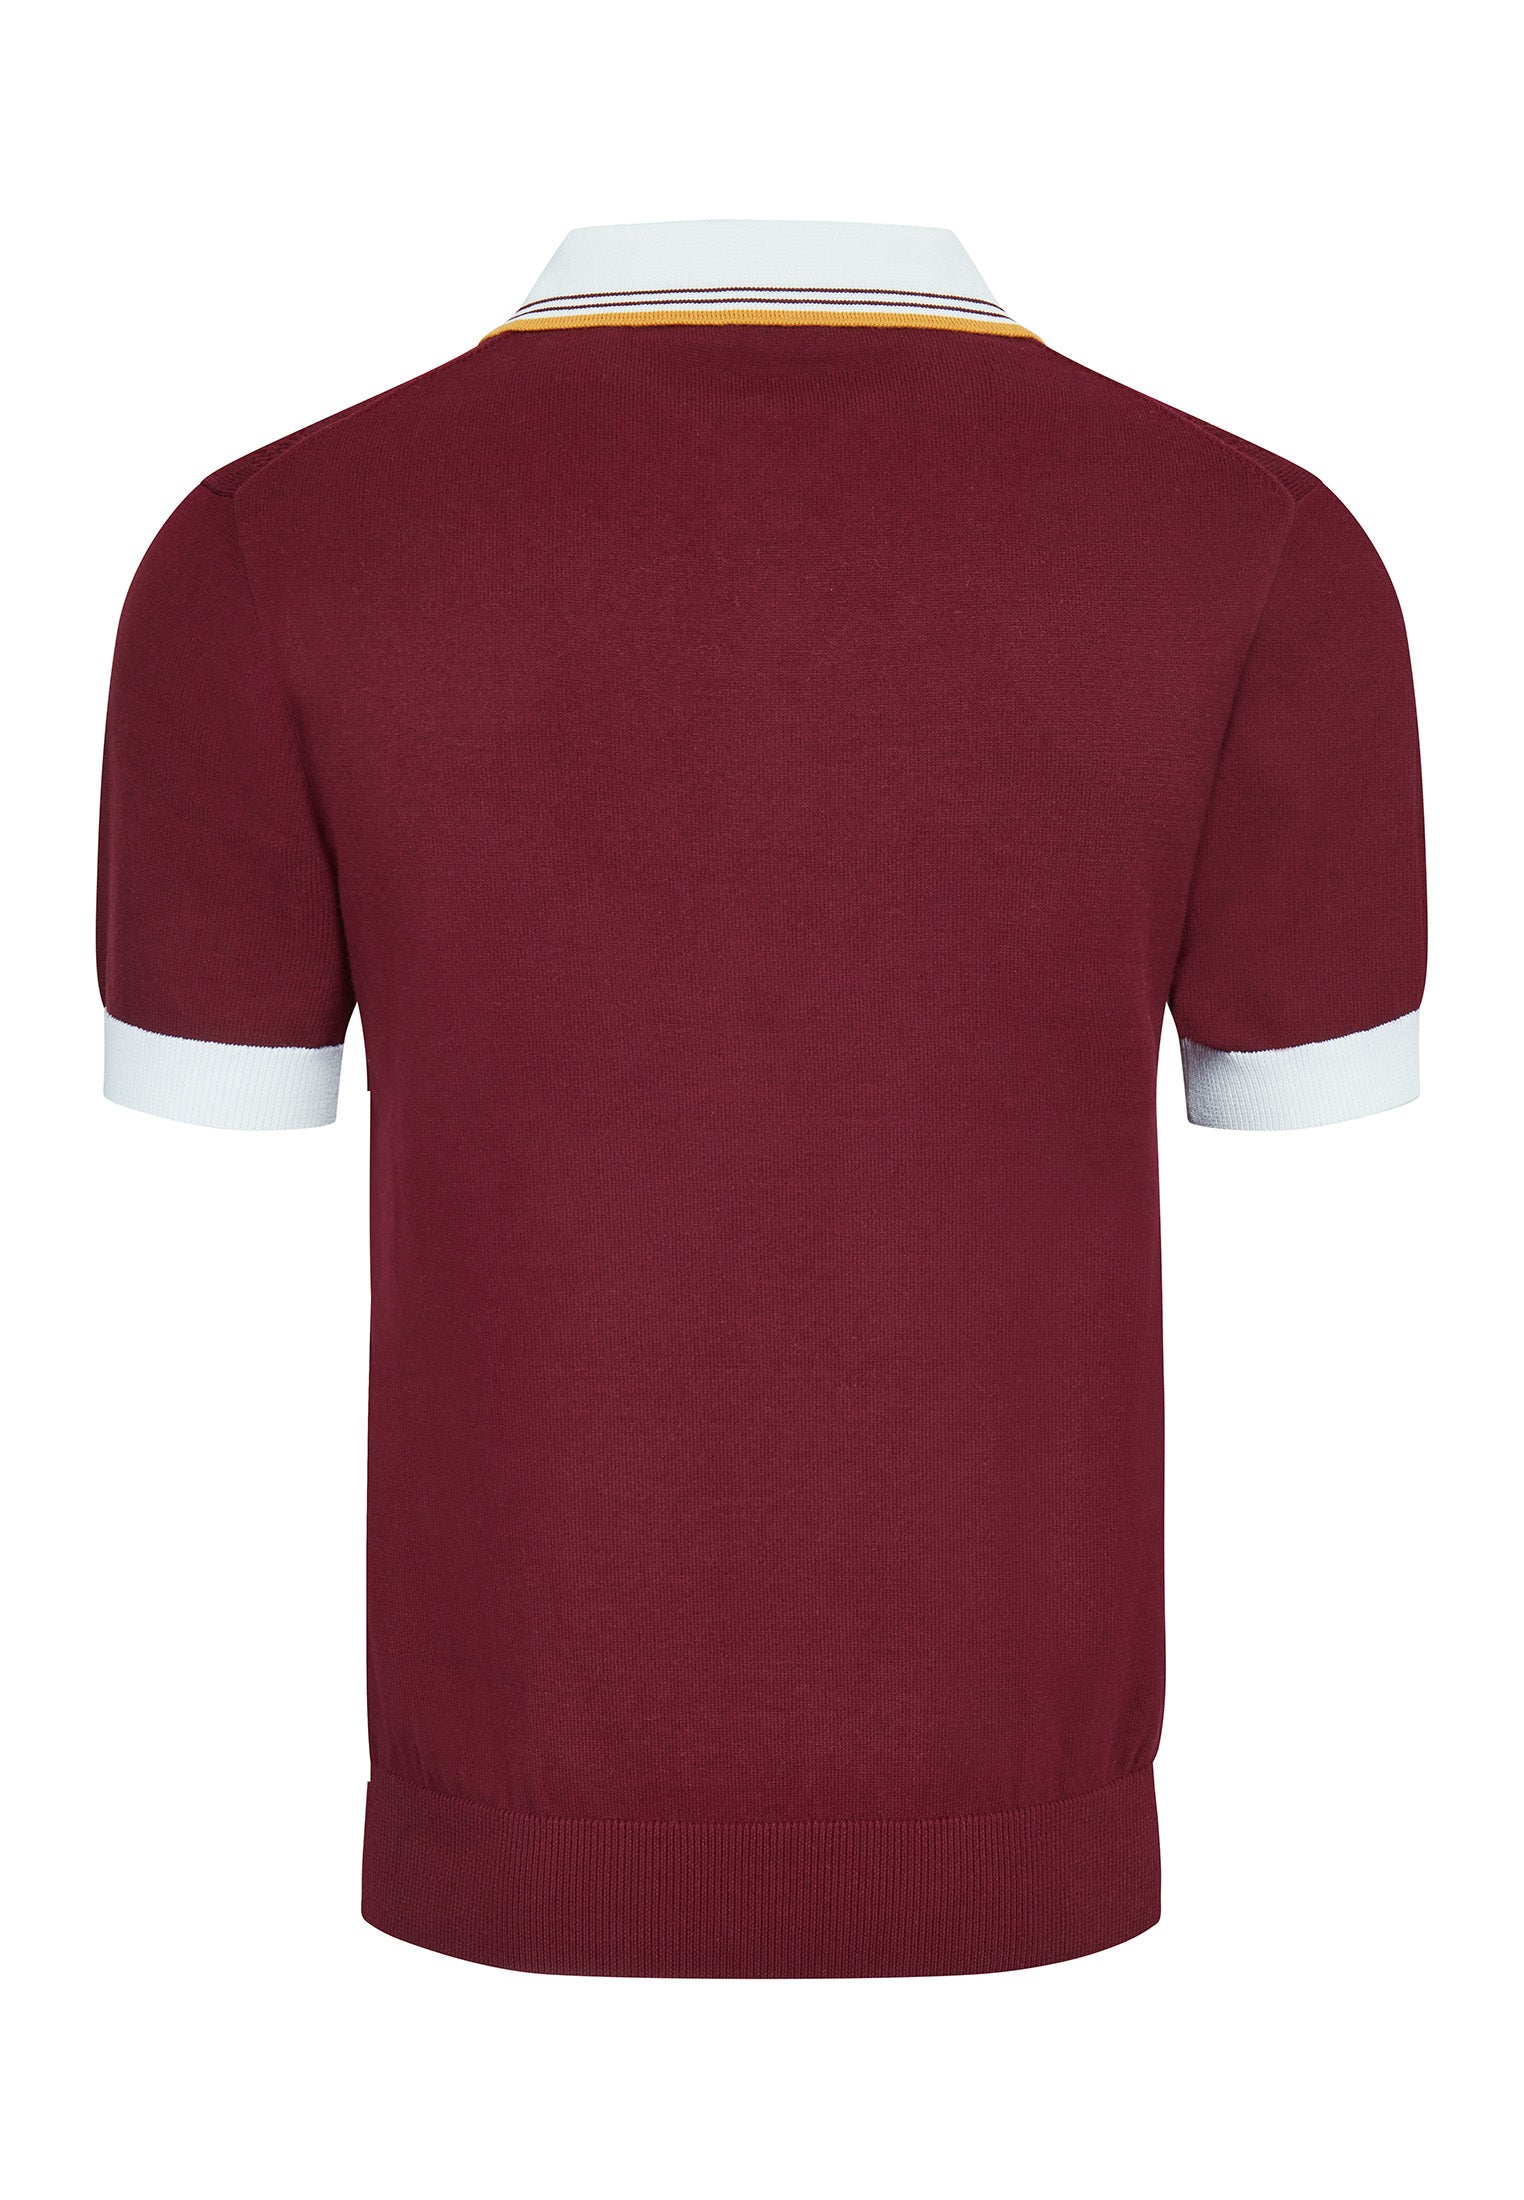 Pointelle Knitted Polo Shirt by Merc